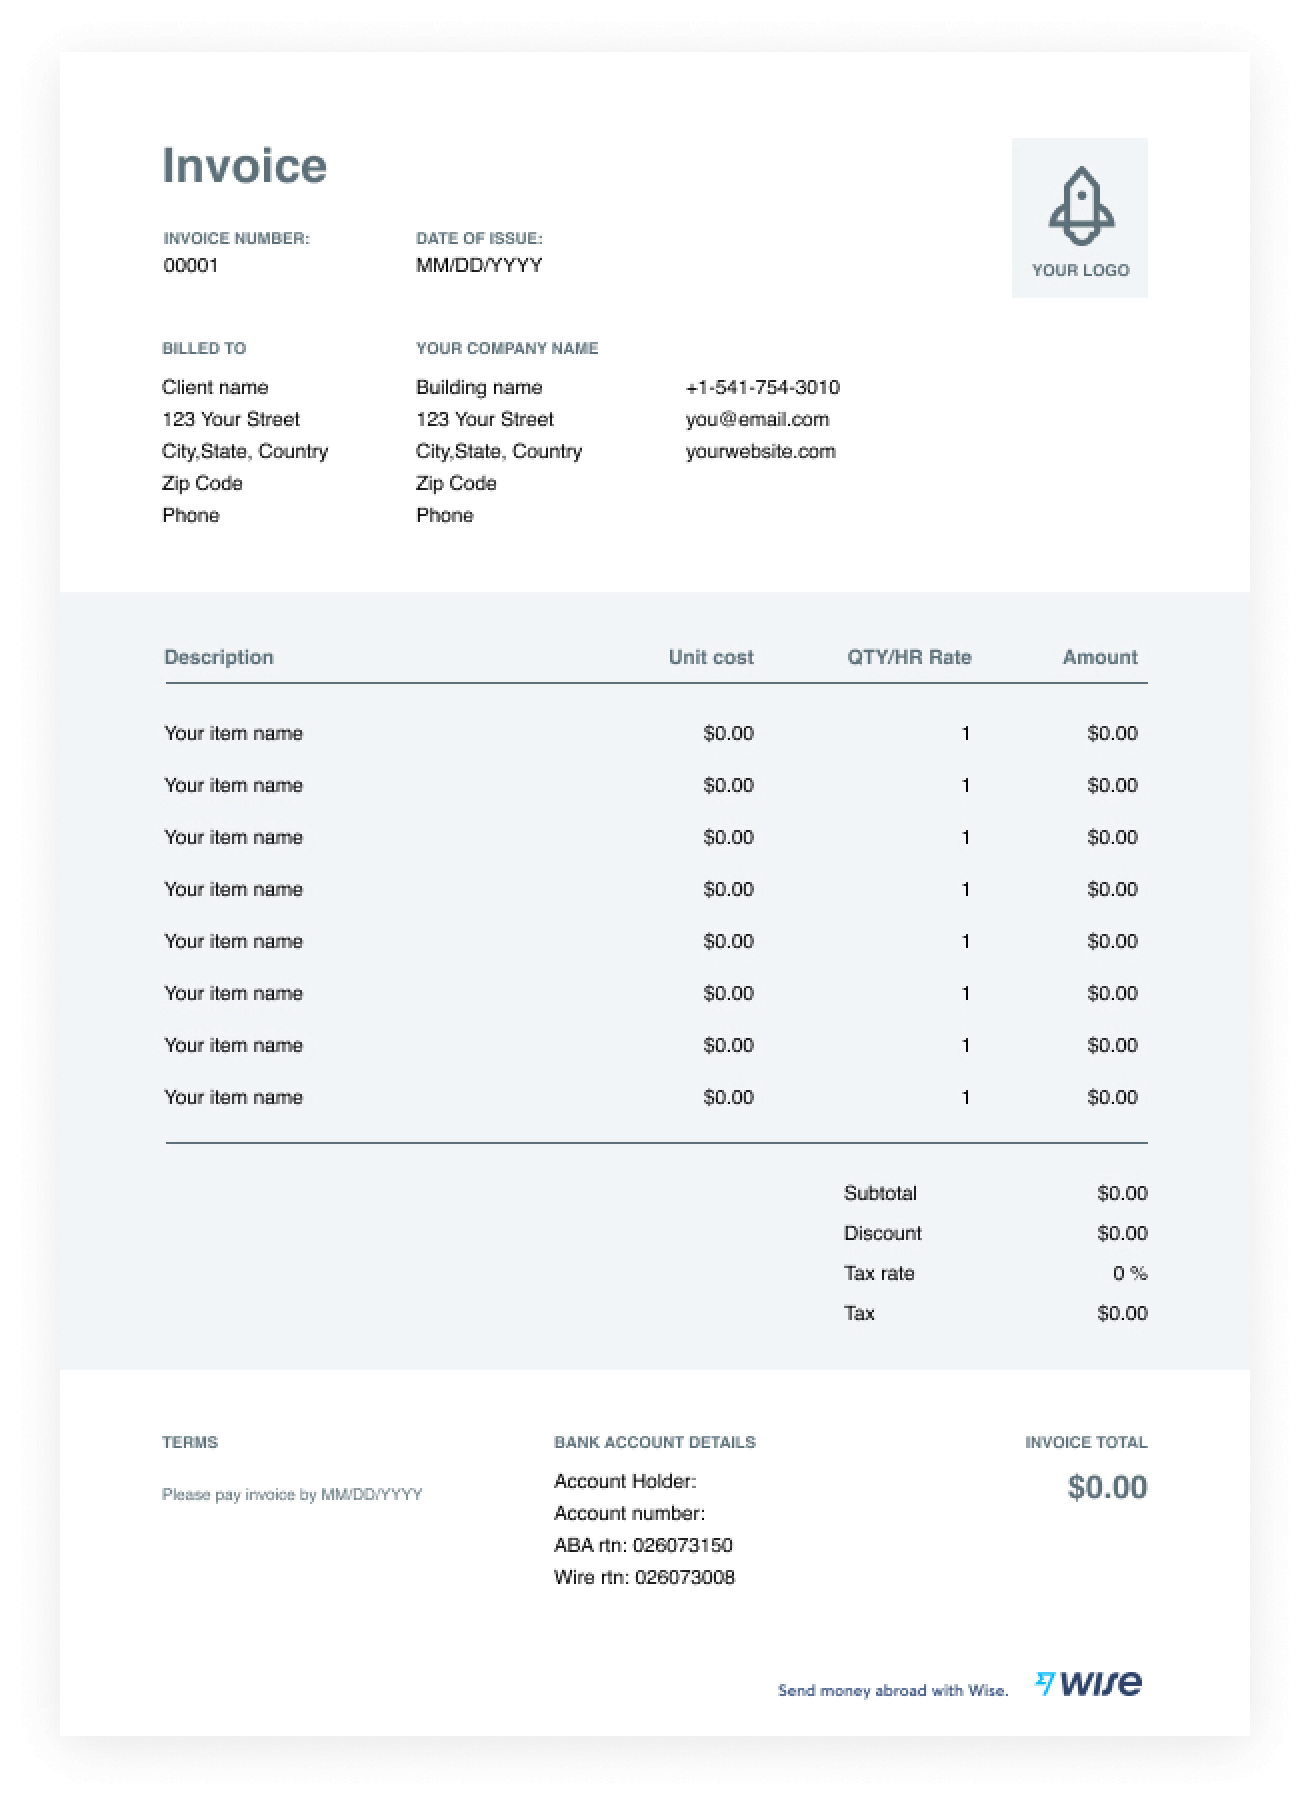 Free Invoice Template - Download and Send Invoices Easily - Wise